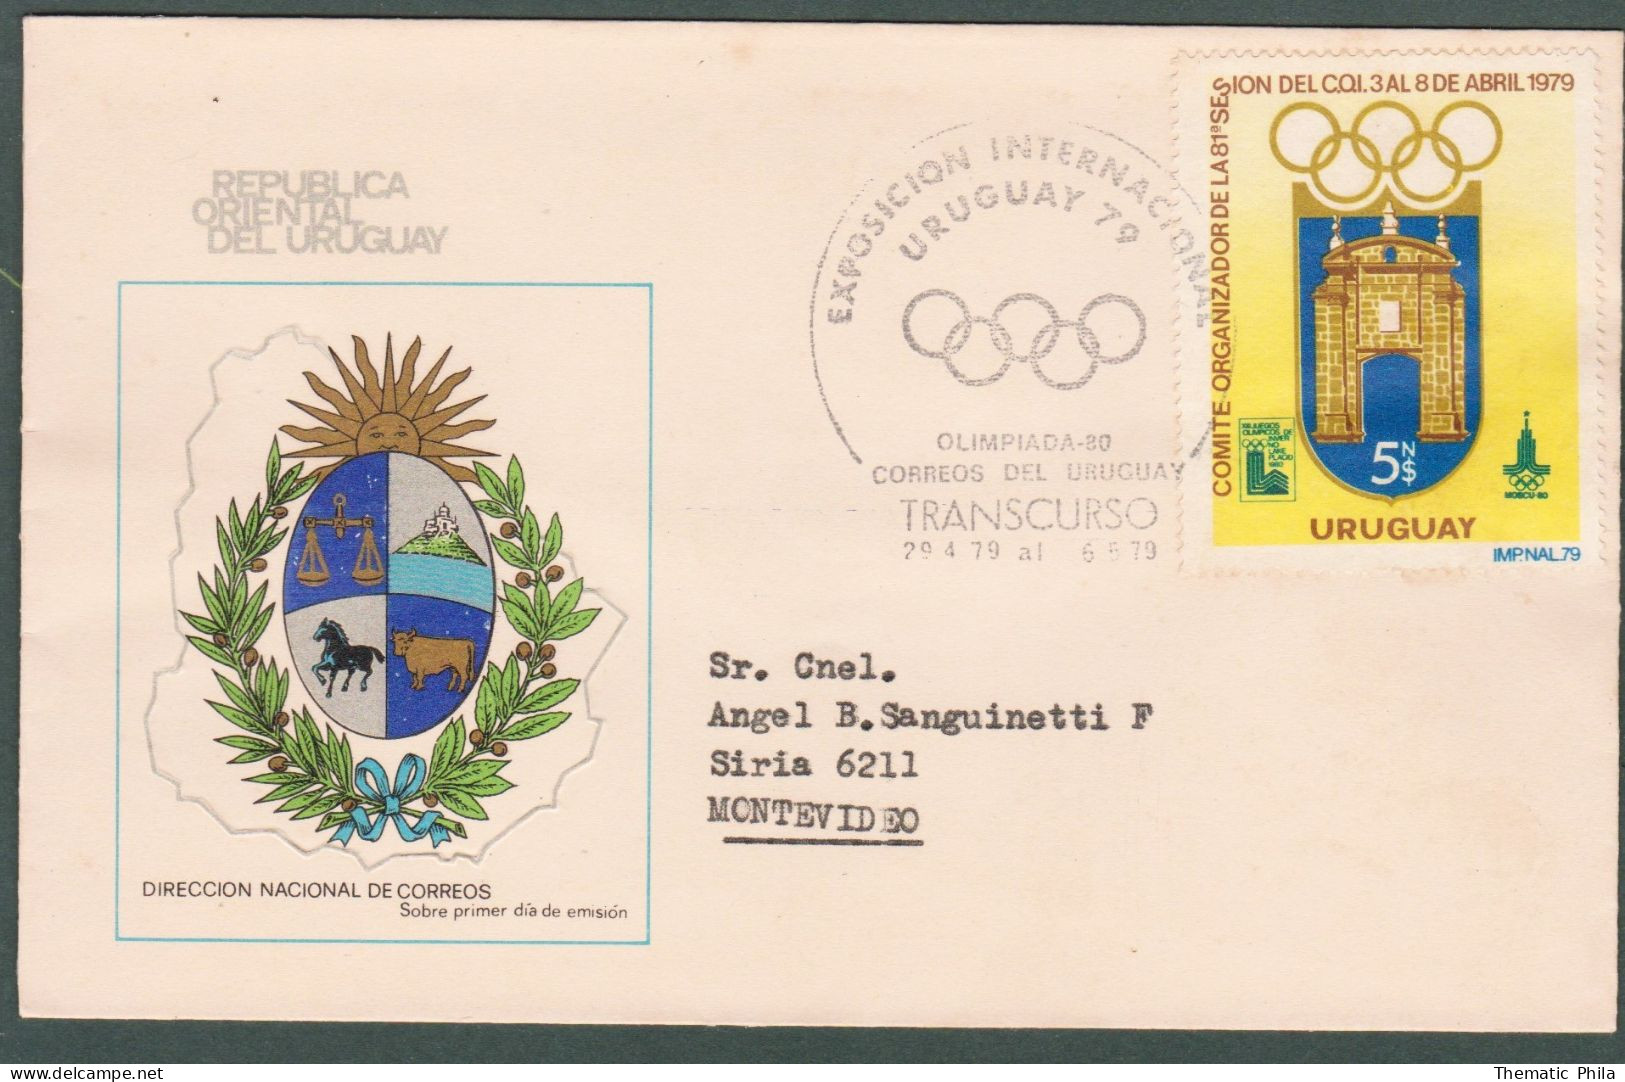 1979 URUGUAY Special Postmark Transcurso Expo International Olympic Games -Comité International Olympique Moscu 80 - Invierno 1980: Lake Placid